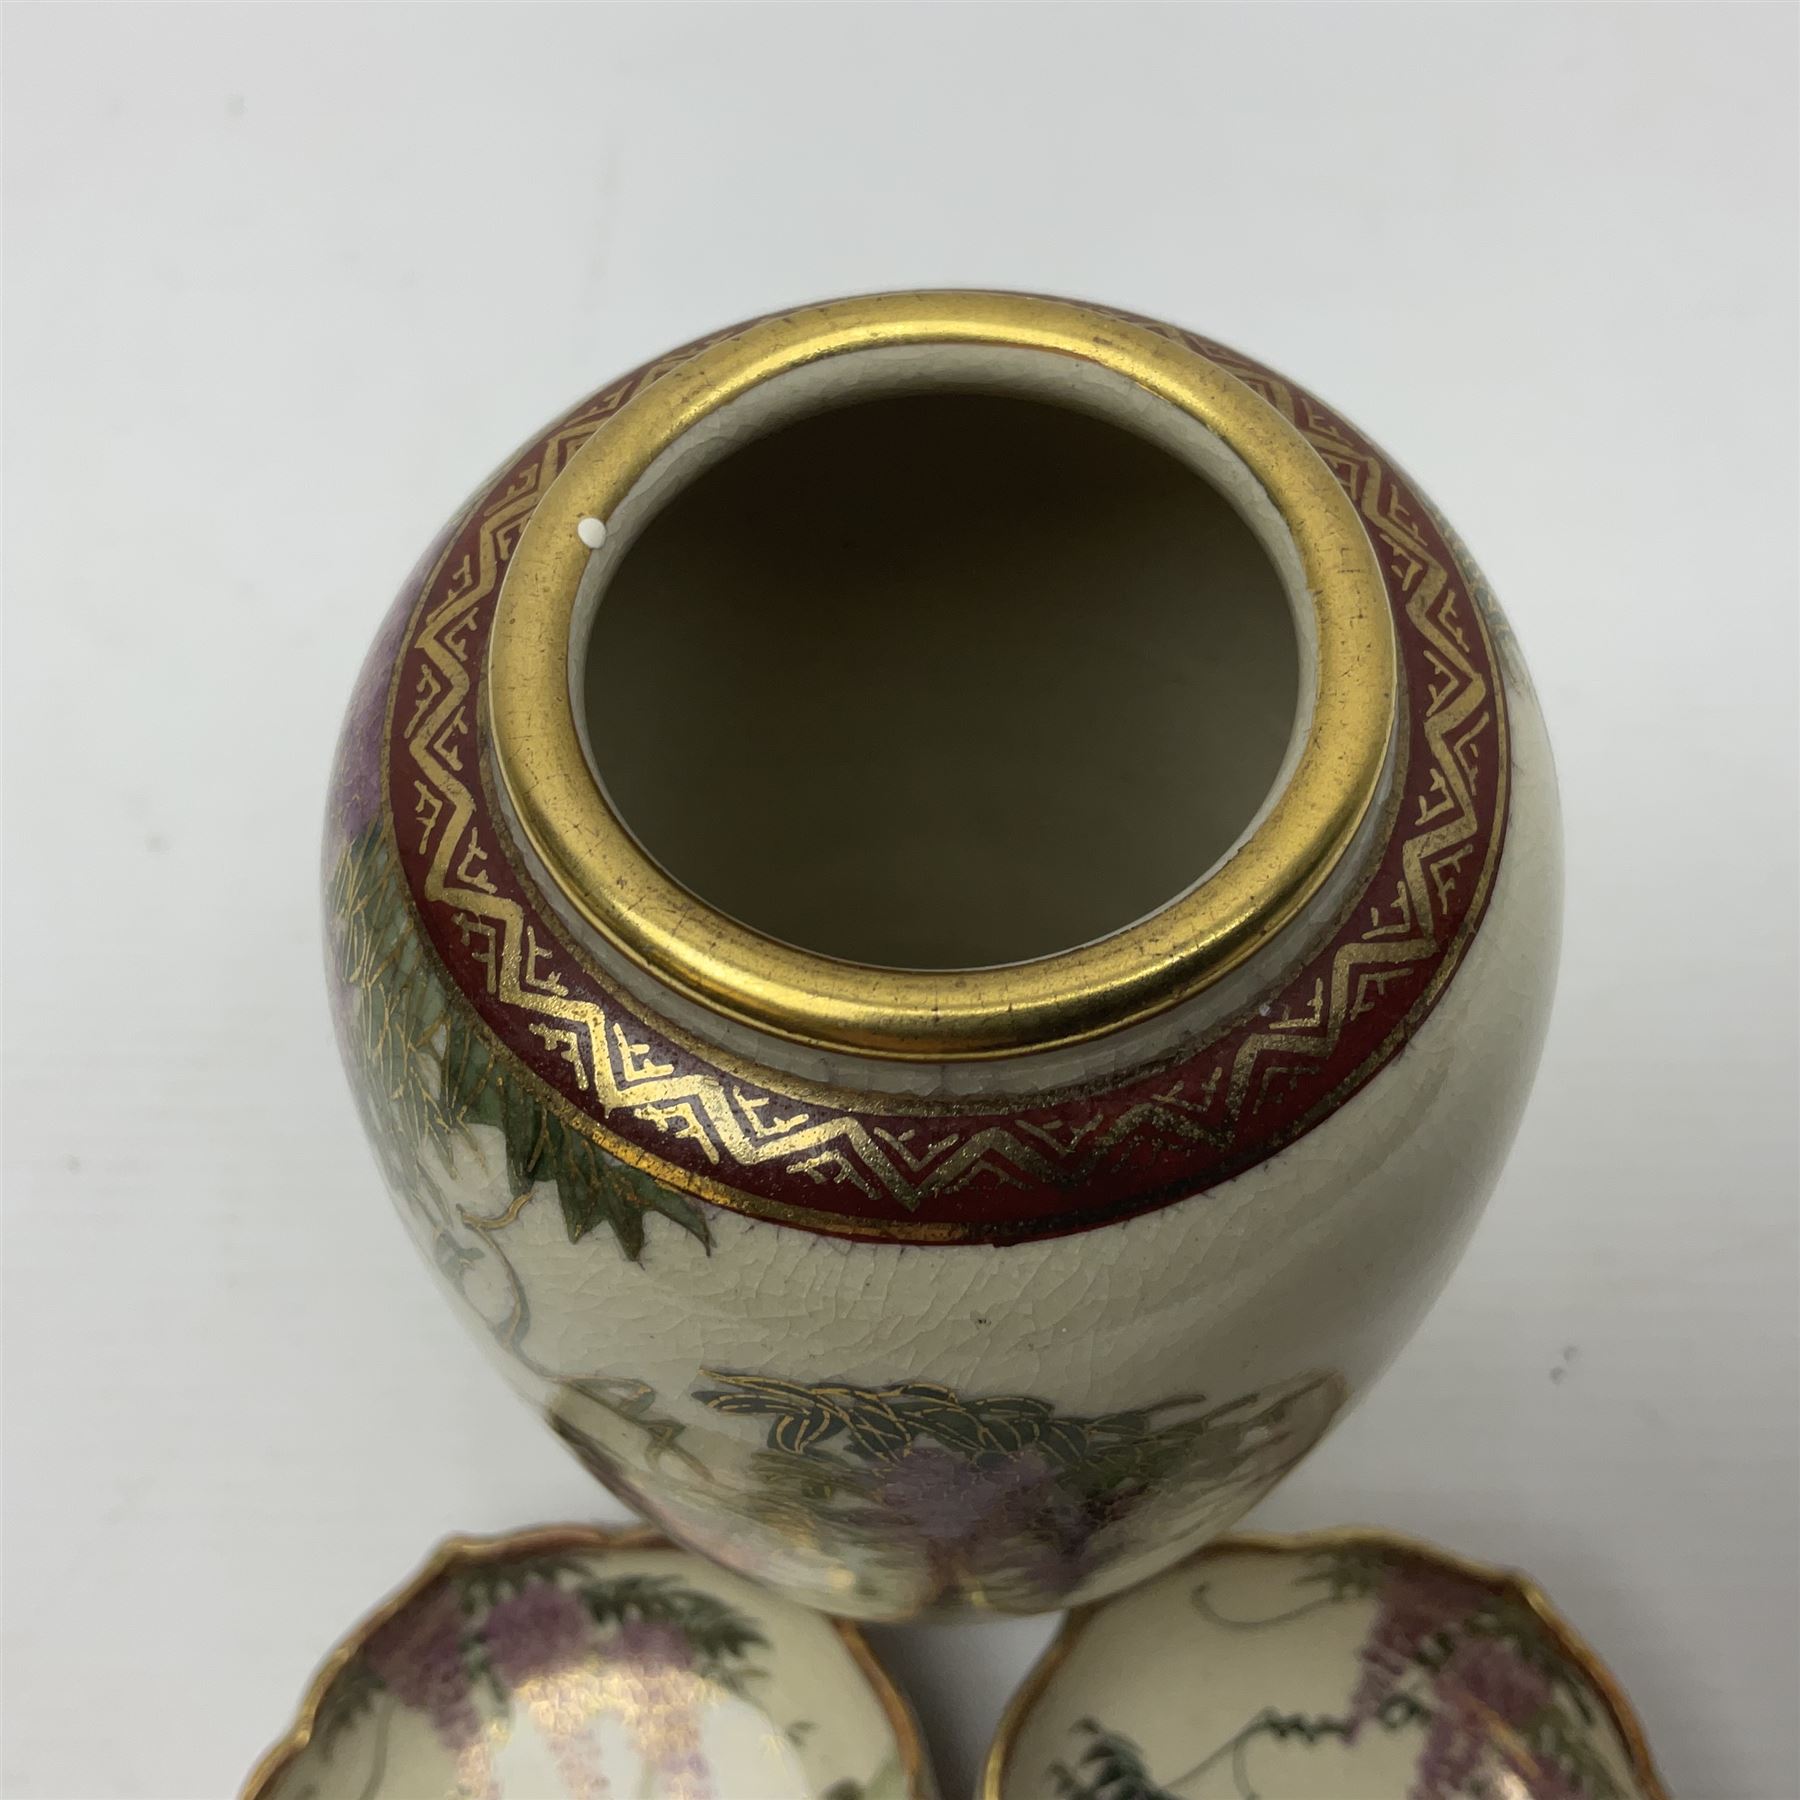 Japanese Satsuma Meiji period vase painted with a mountainous river landscape scene with wisteria an - Image 2 of 9